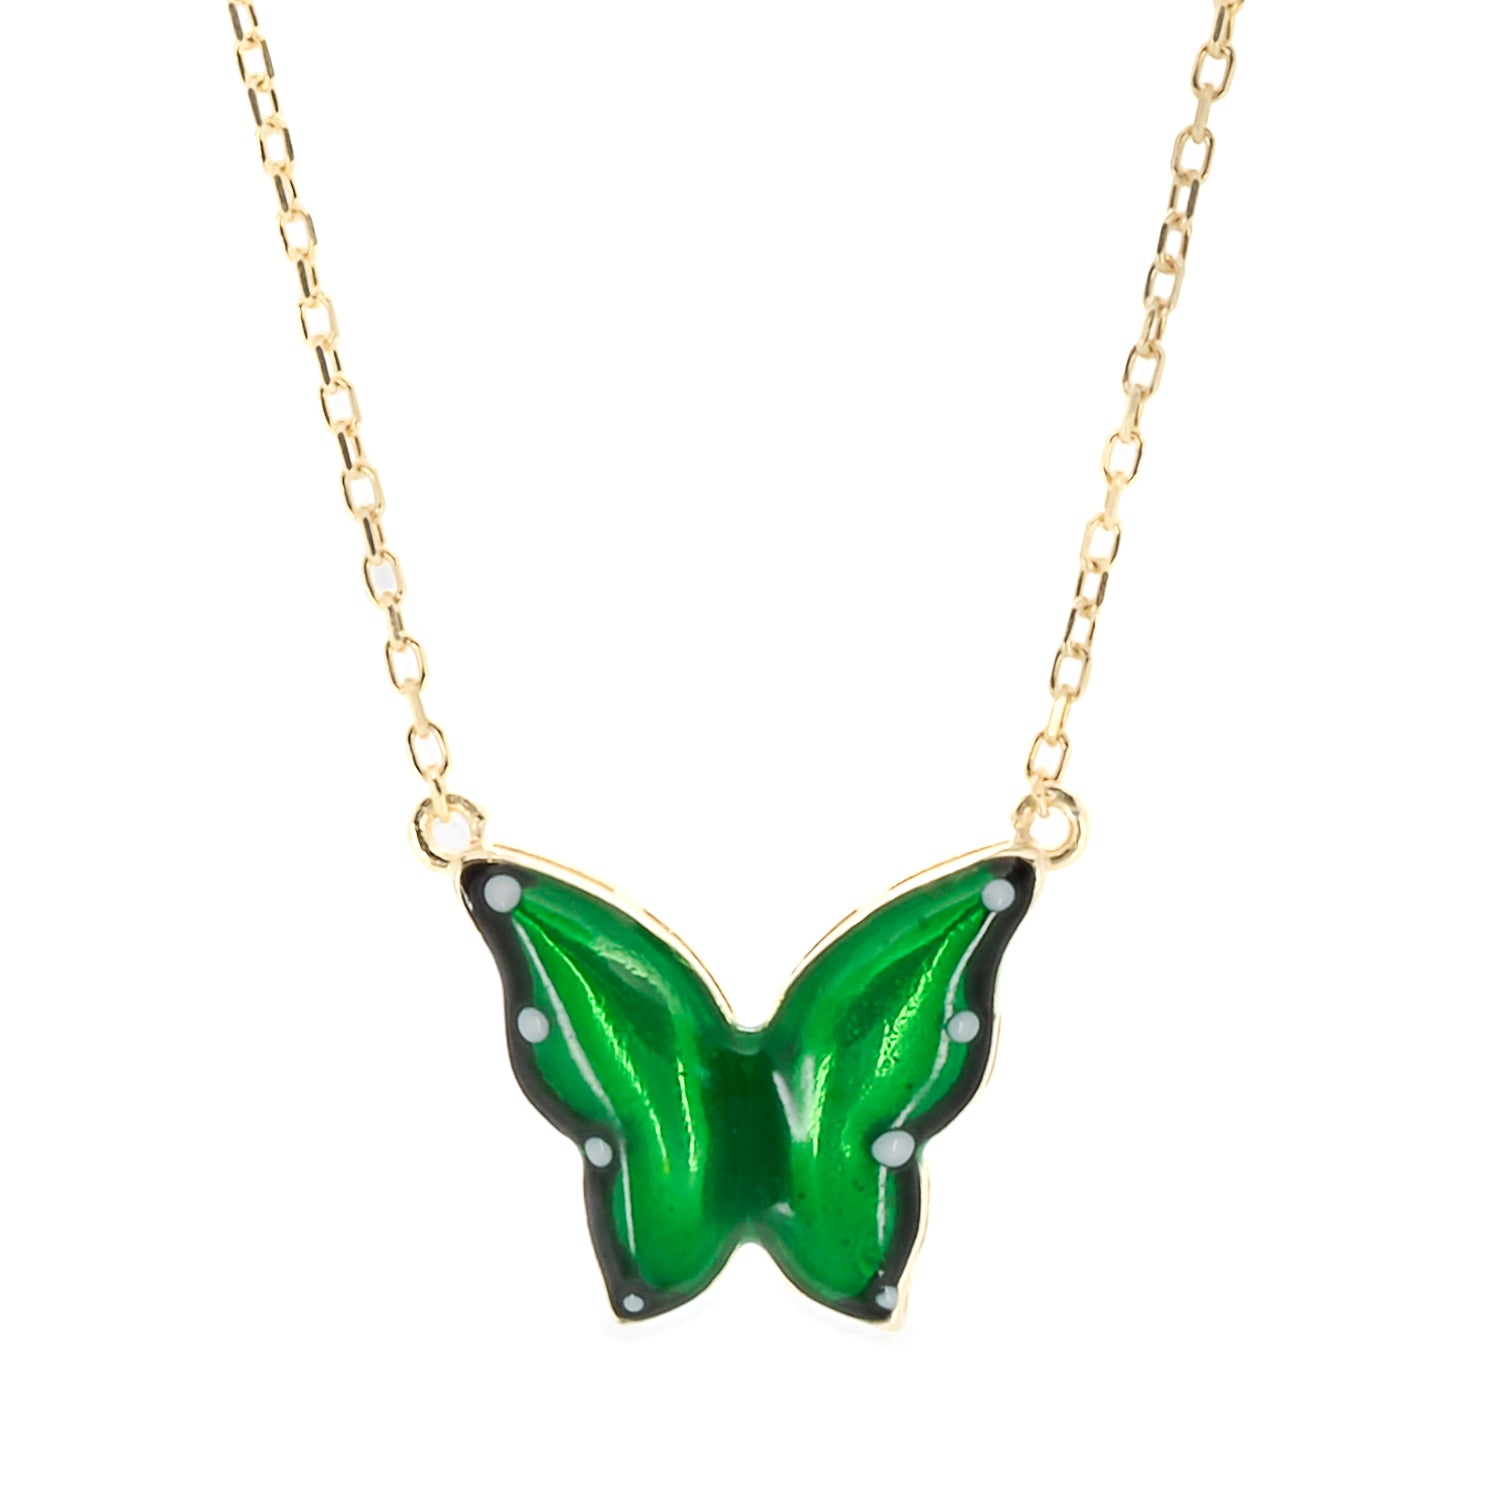 The Gold Abundance Green Enamel Butterfly Necklace, a captivating piece of jewelry that combines the beauty of sterling silver with the spiritual significance of a blue enamel butterfly pendant